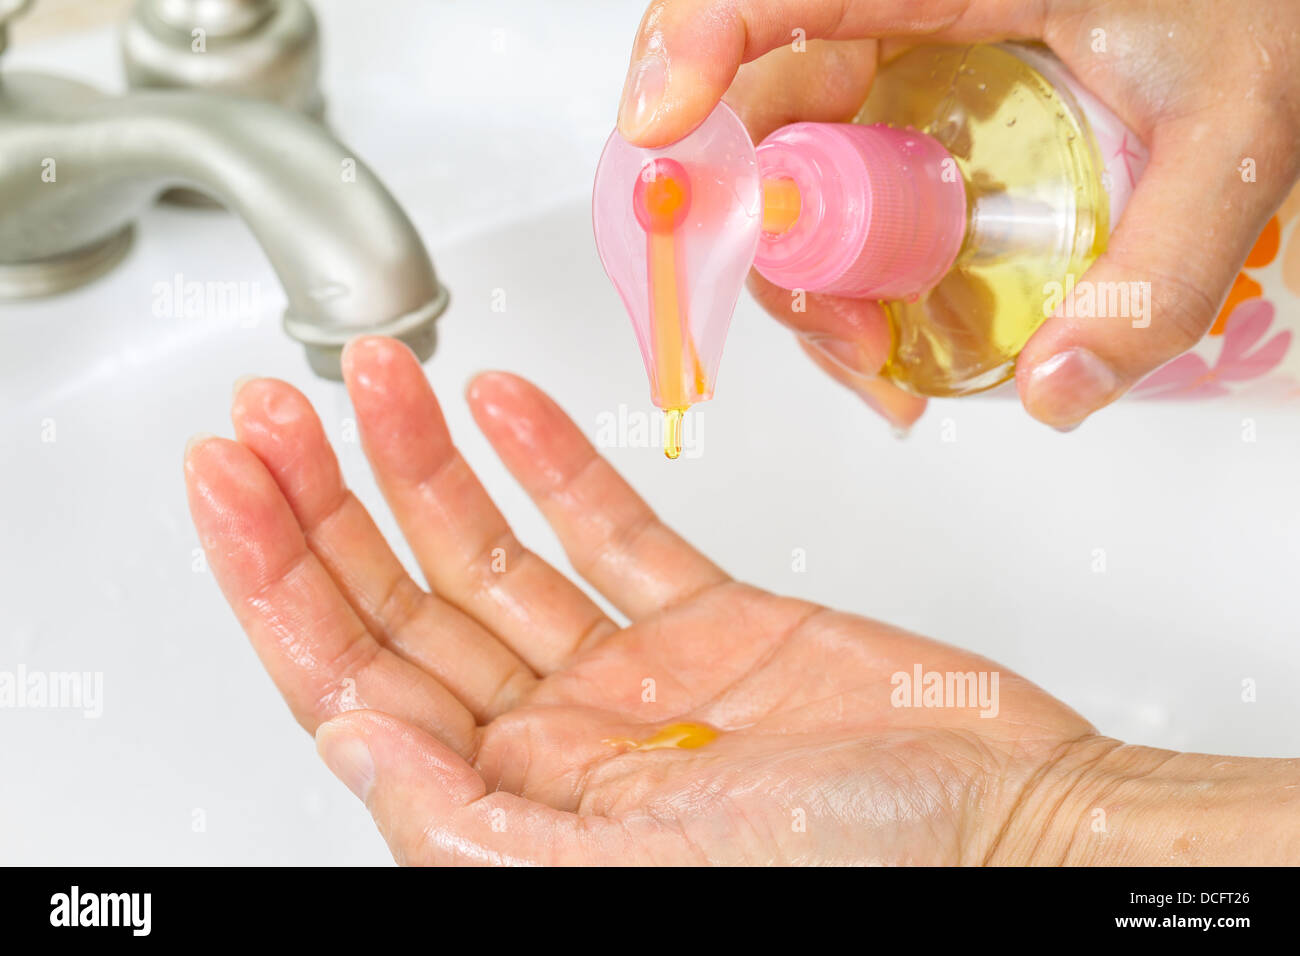 Horizontal photo of female hands putting liquid wash soap, from bottle, into hand with bathroom sink and faucet in background Stock Photo